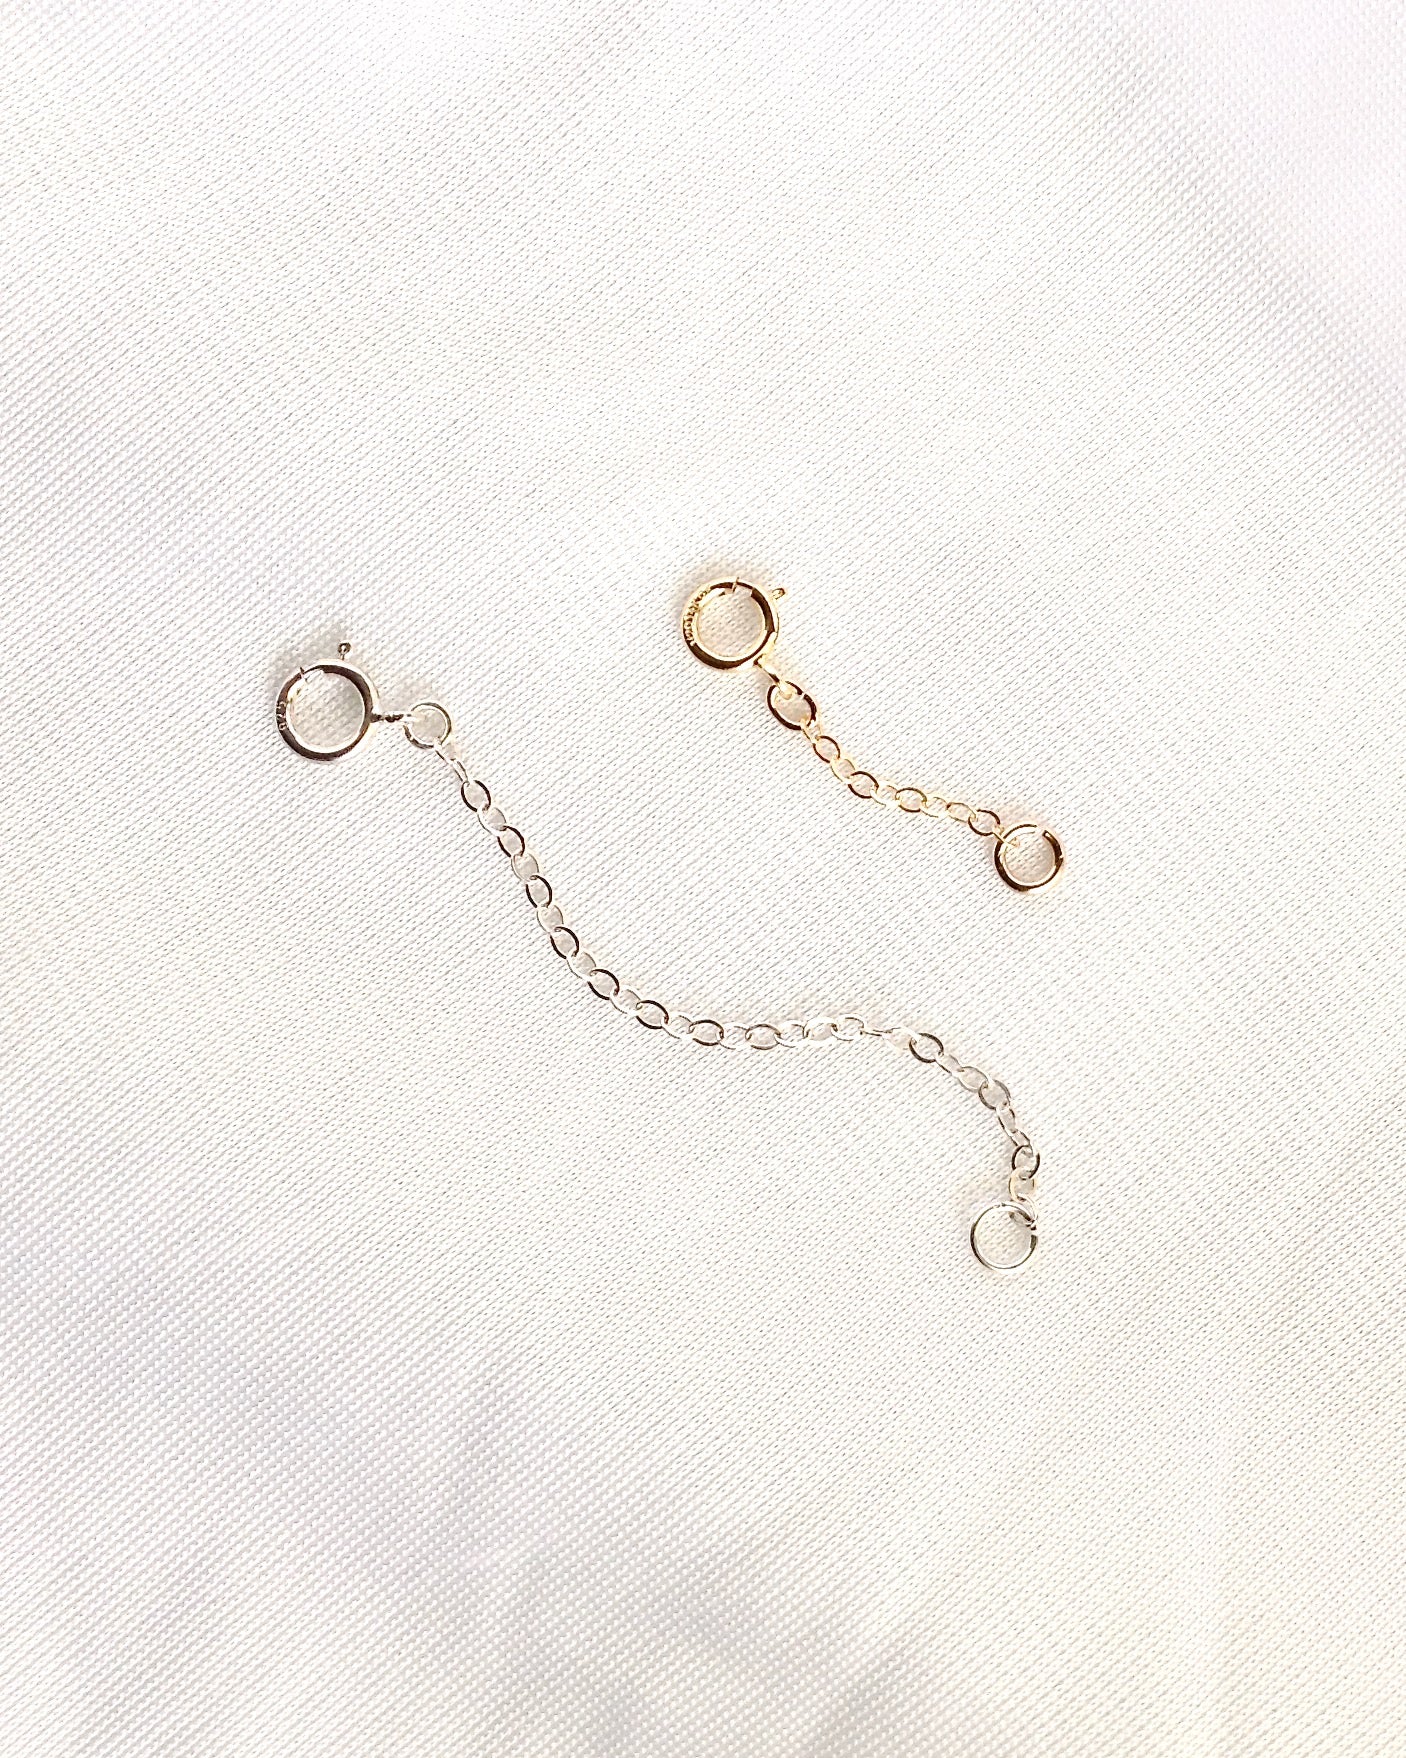 Extender Chain For Necklace Bracelet or Anklet in Sterling Silver or Gold Filled | IB Jewelry